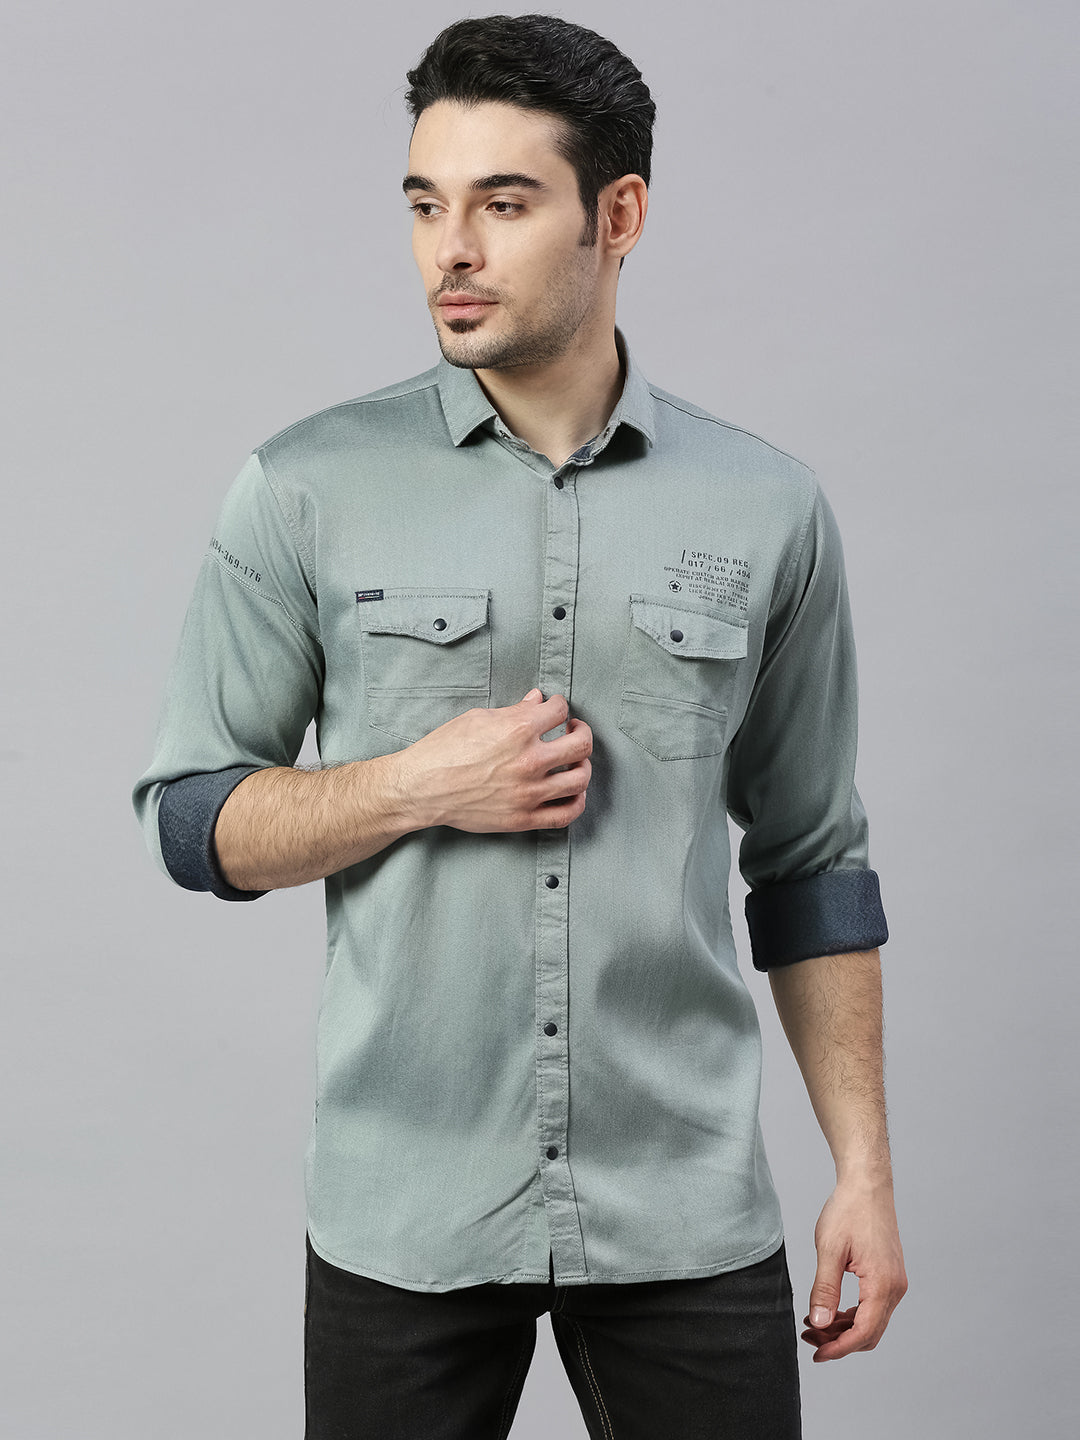 The latest collection of green denim & jeans shirts for men | FASHIOLA INDIA